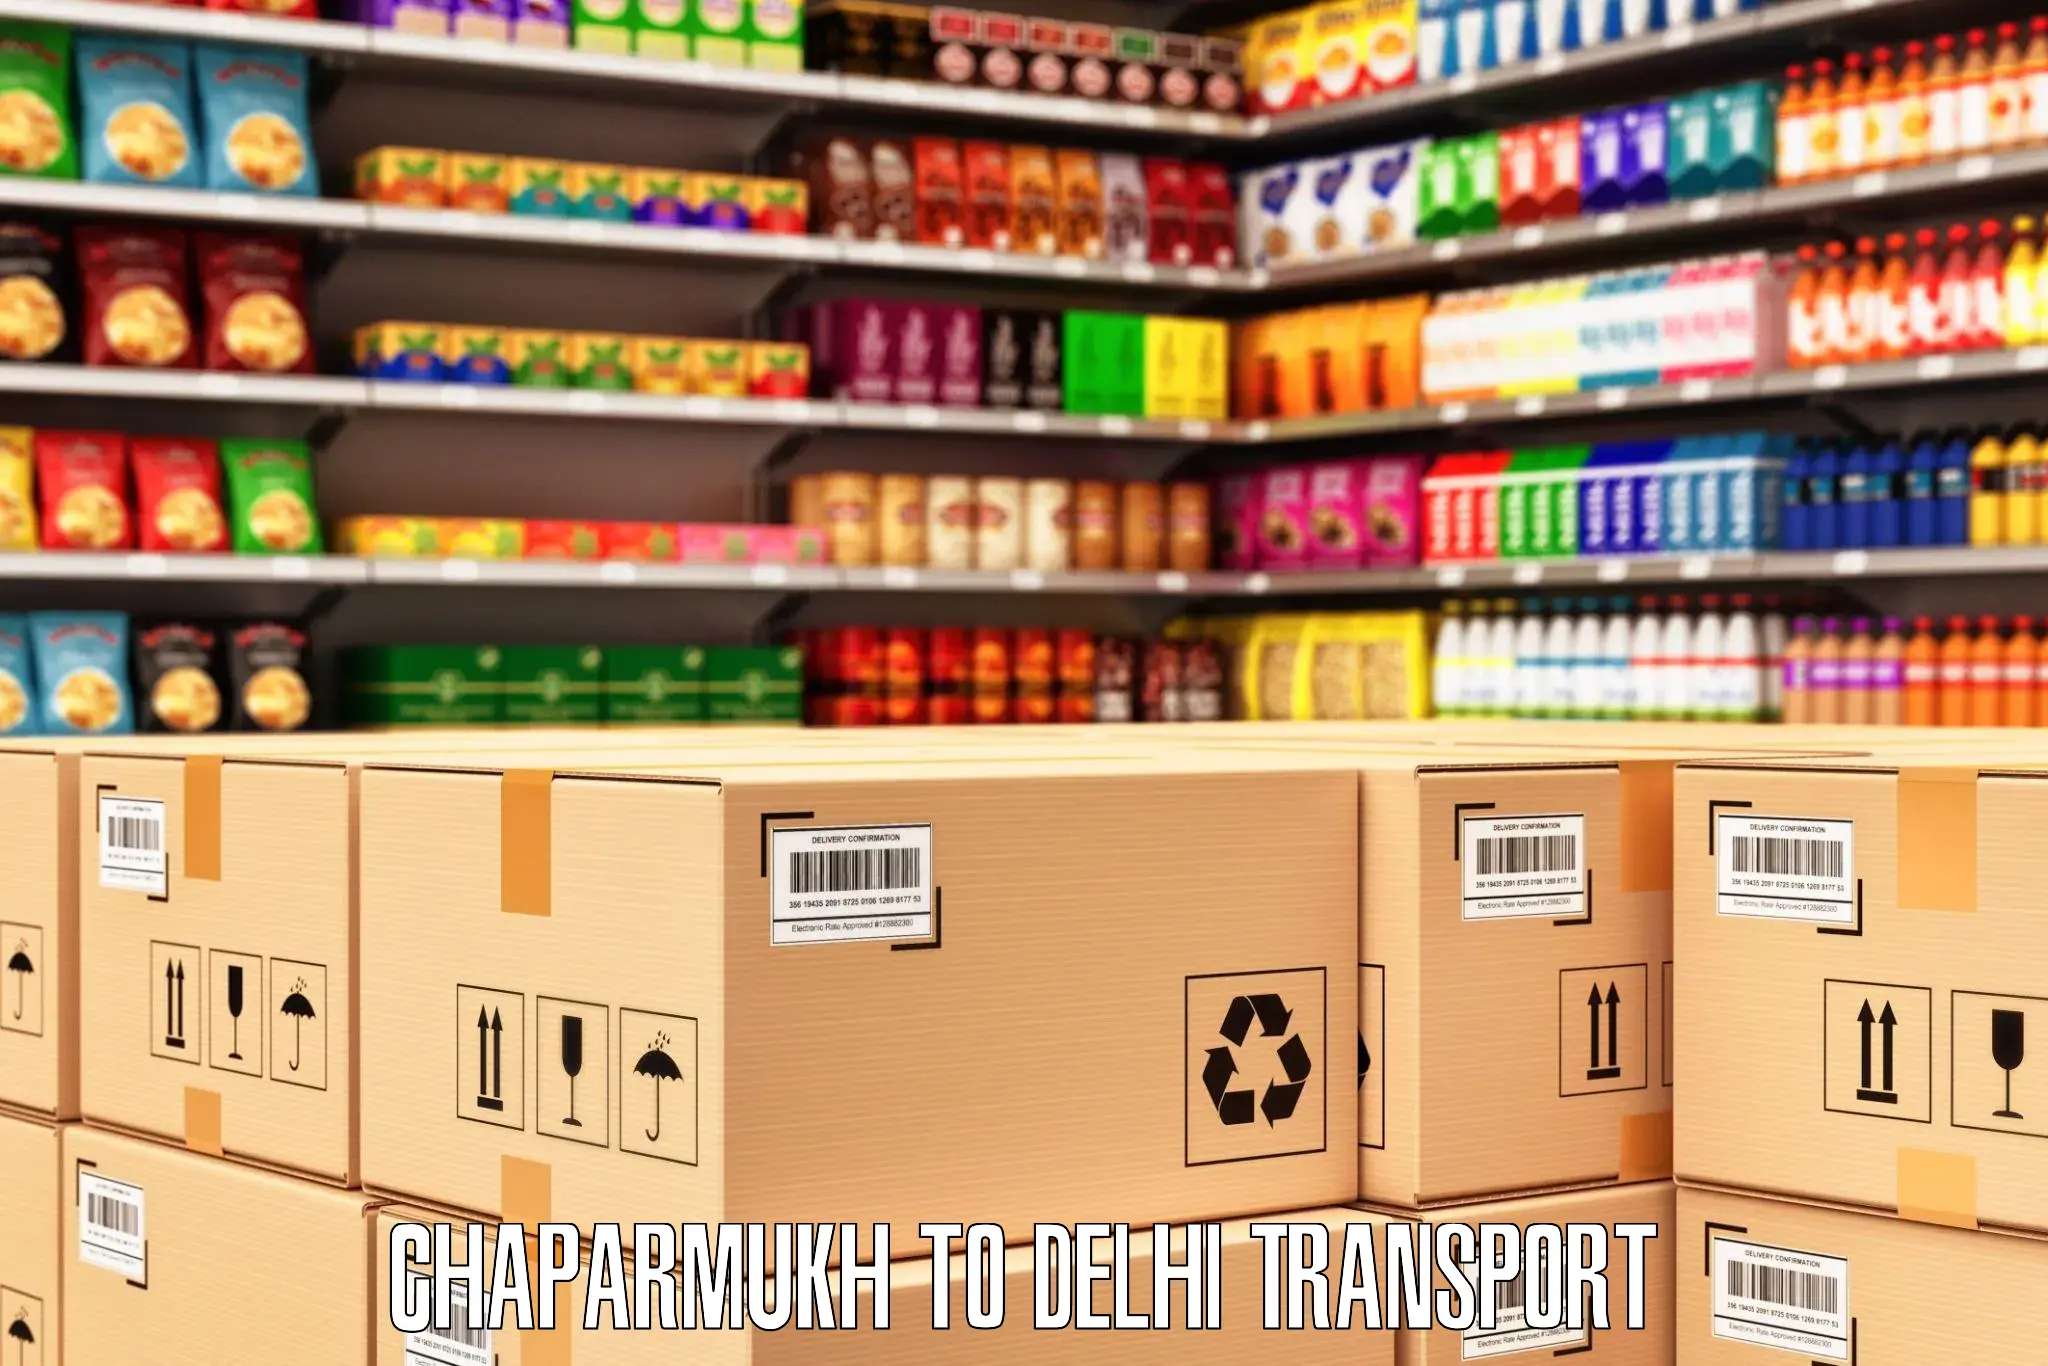 Nationwide transport services Chaparmukh to NCR